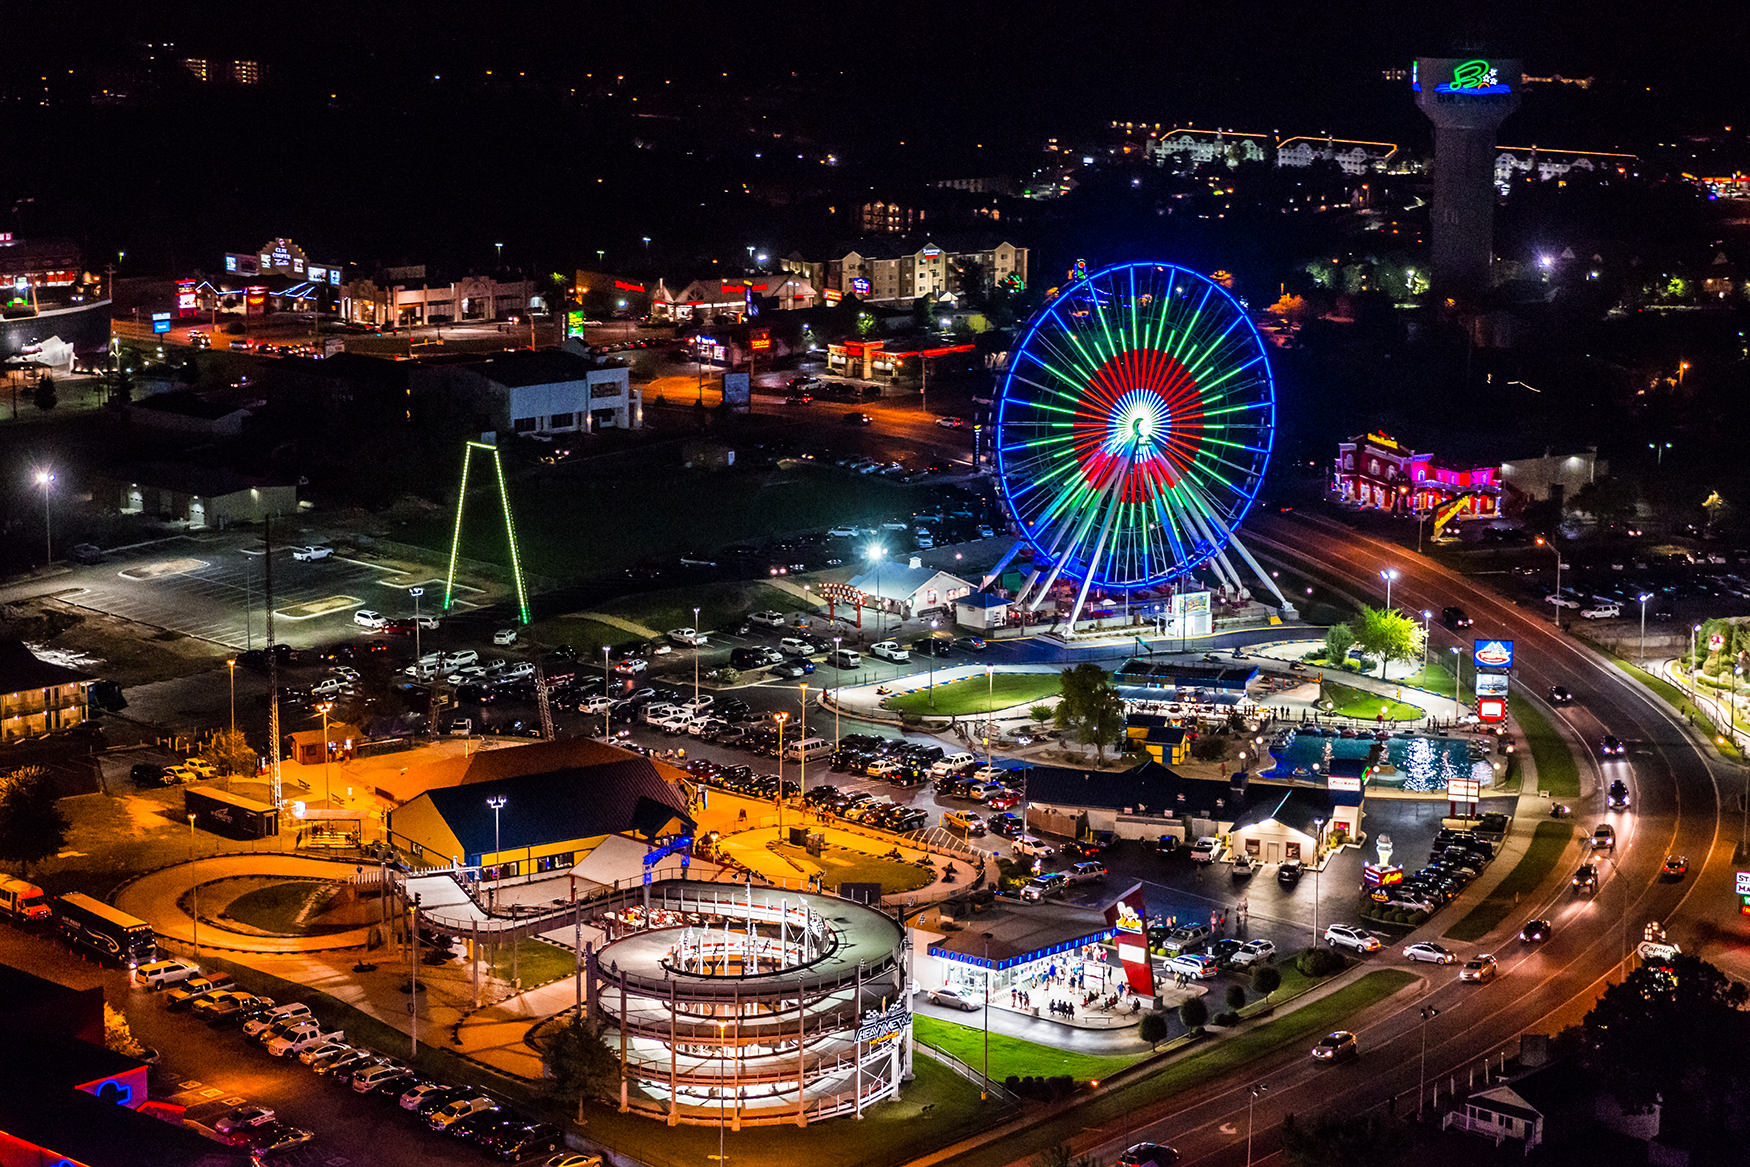 The Track and the Branson Ferris Wheel at night in Branson MO